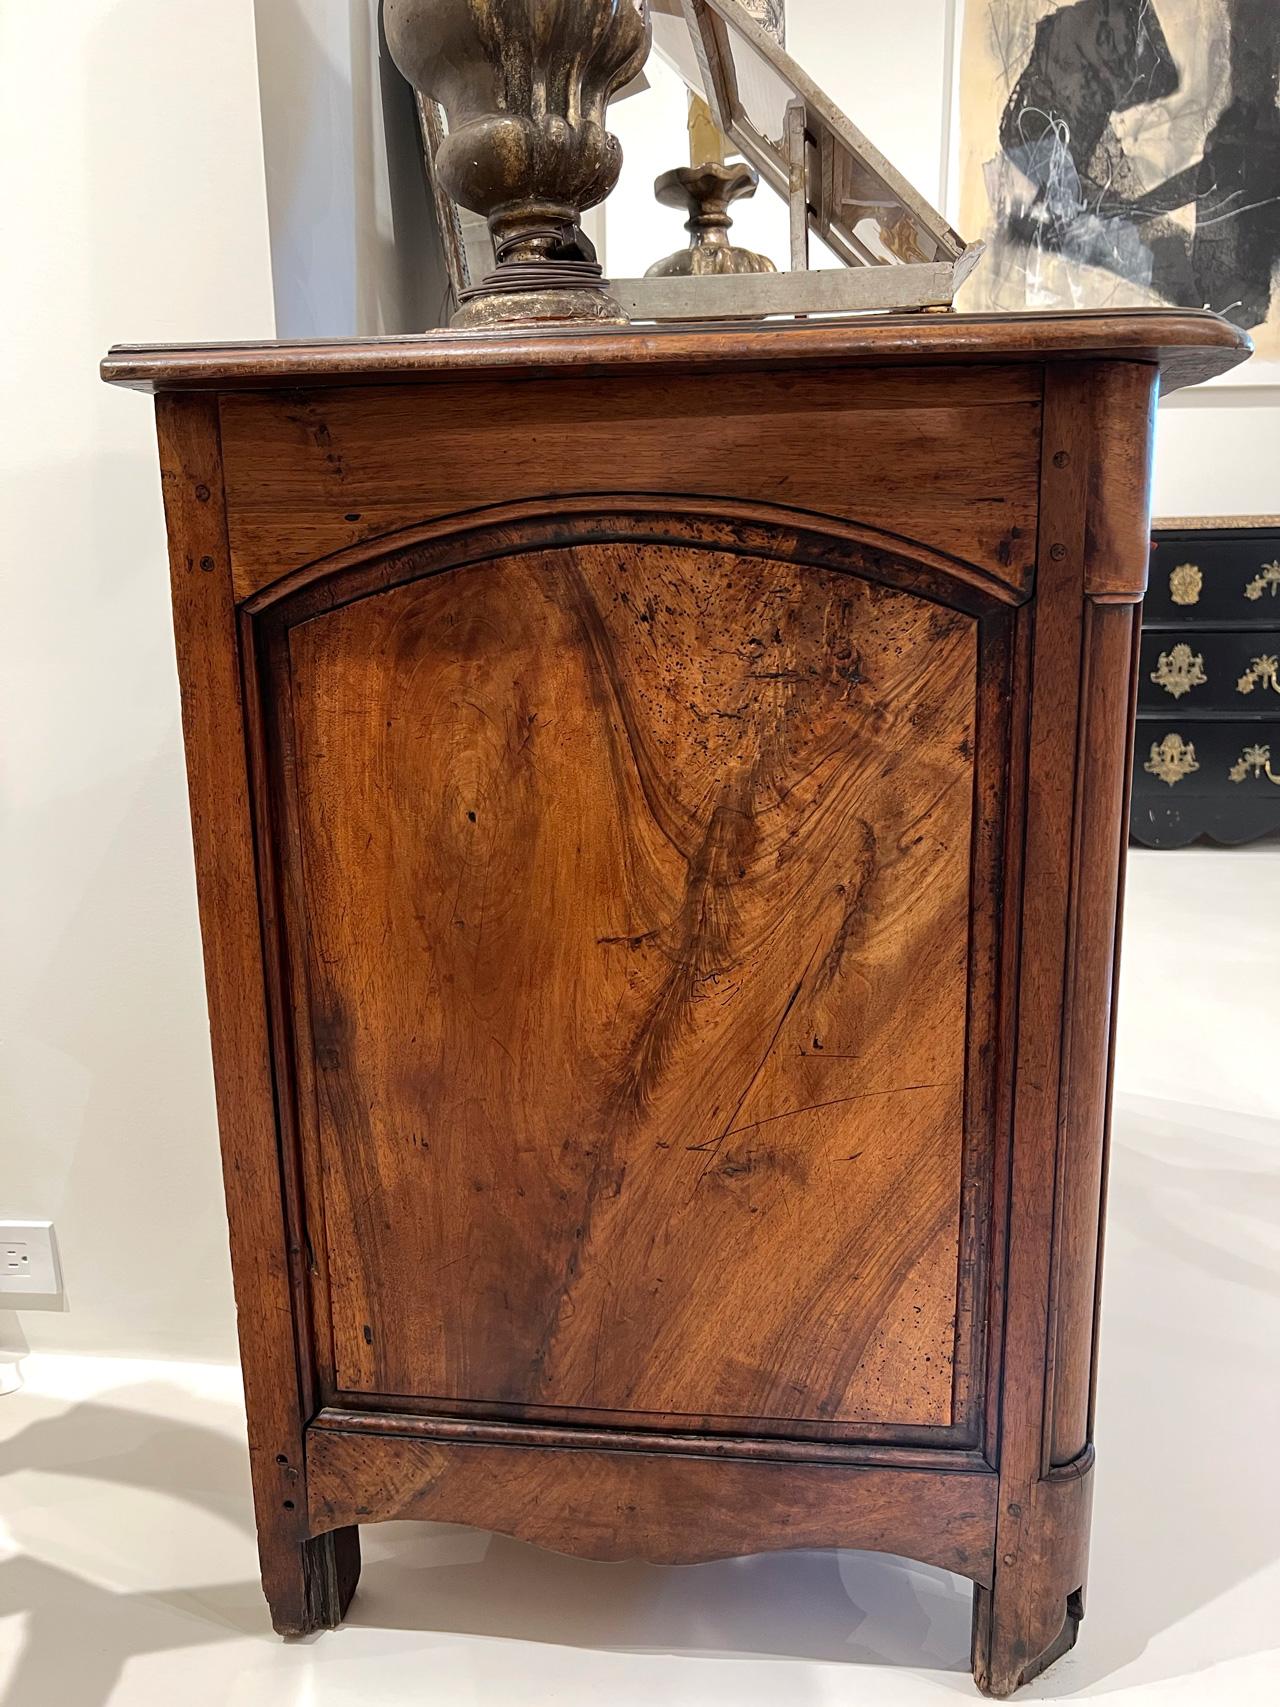 This refined Walnut Commode has two small top drawers and two larger bottom drawers. There are bronze eschutions and pulls on the drawers as well as one decorative bronze medallion at top center of chest. The base is beautifully curved with a carved